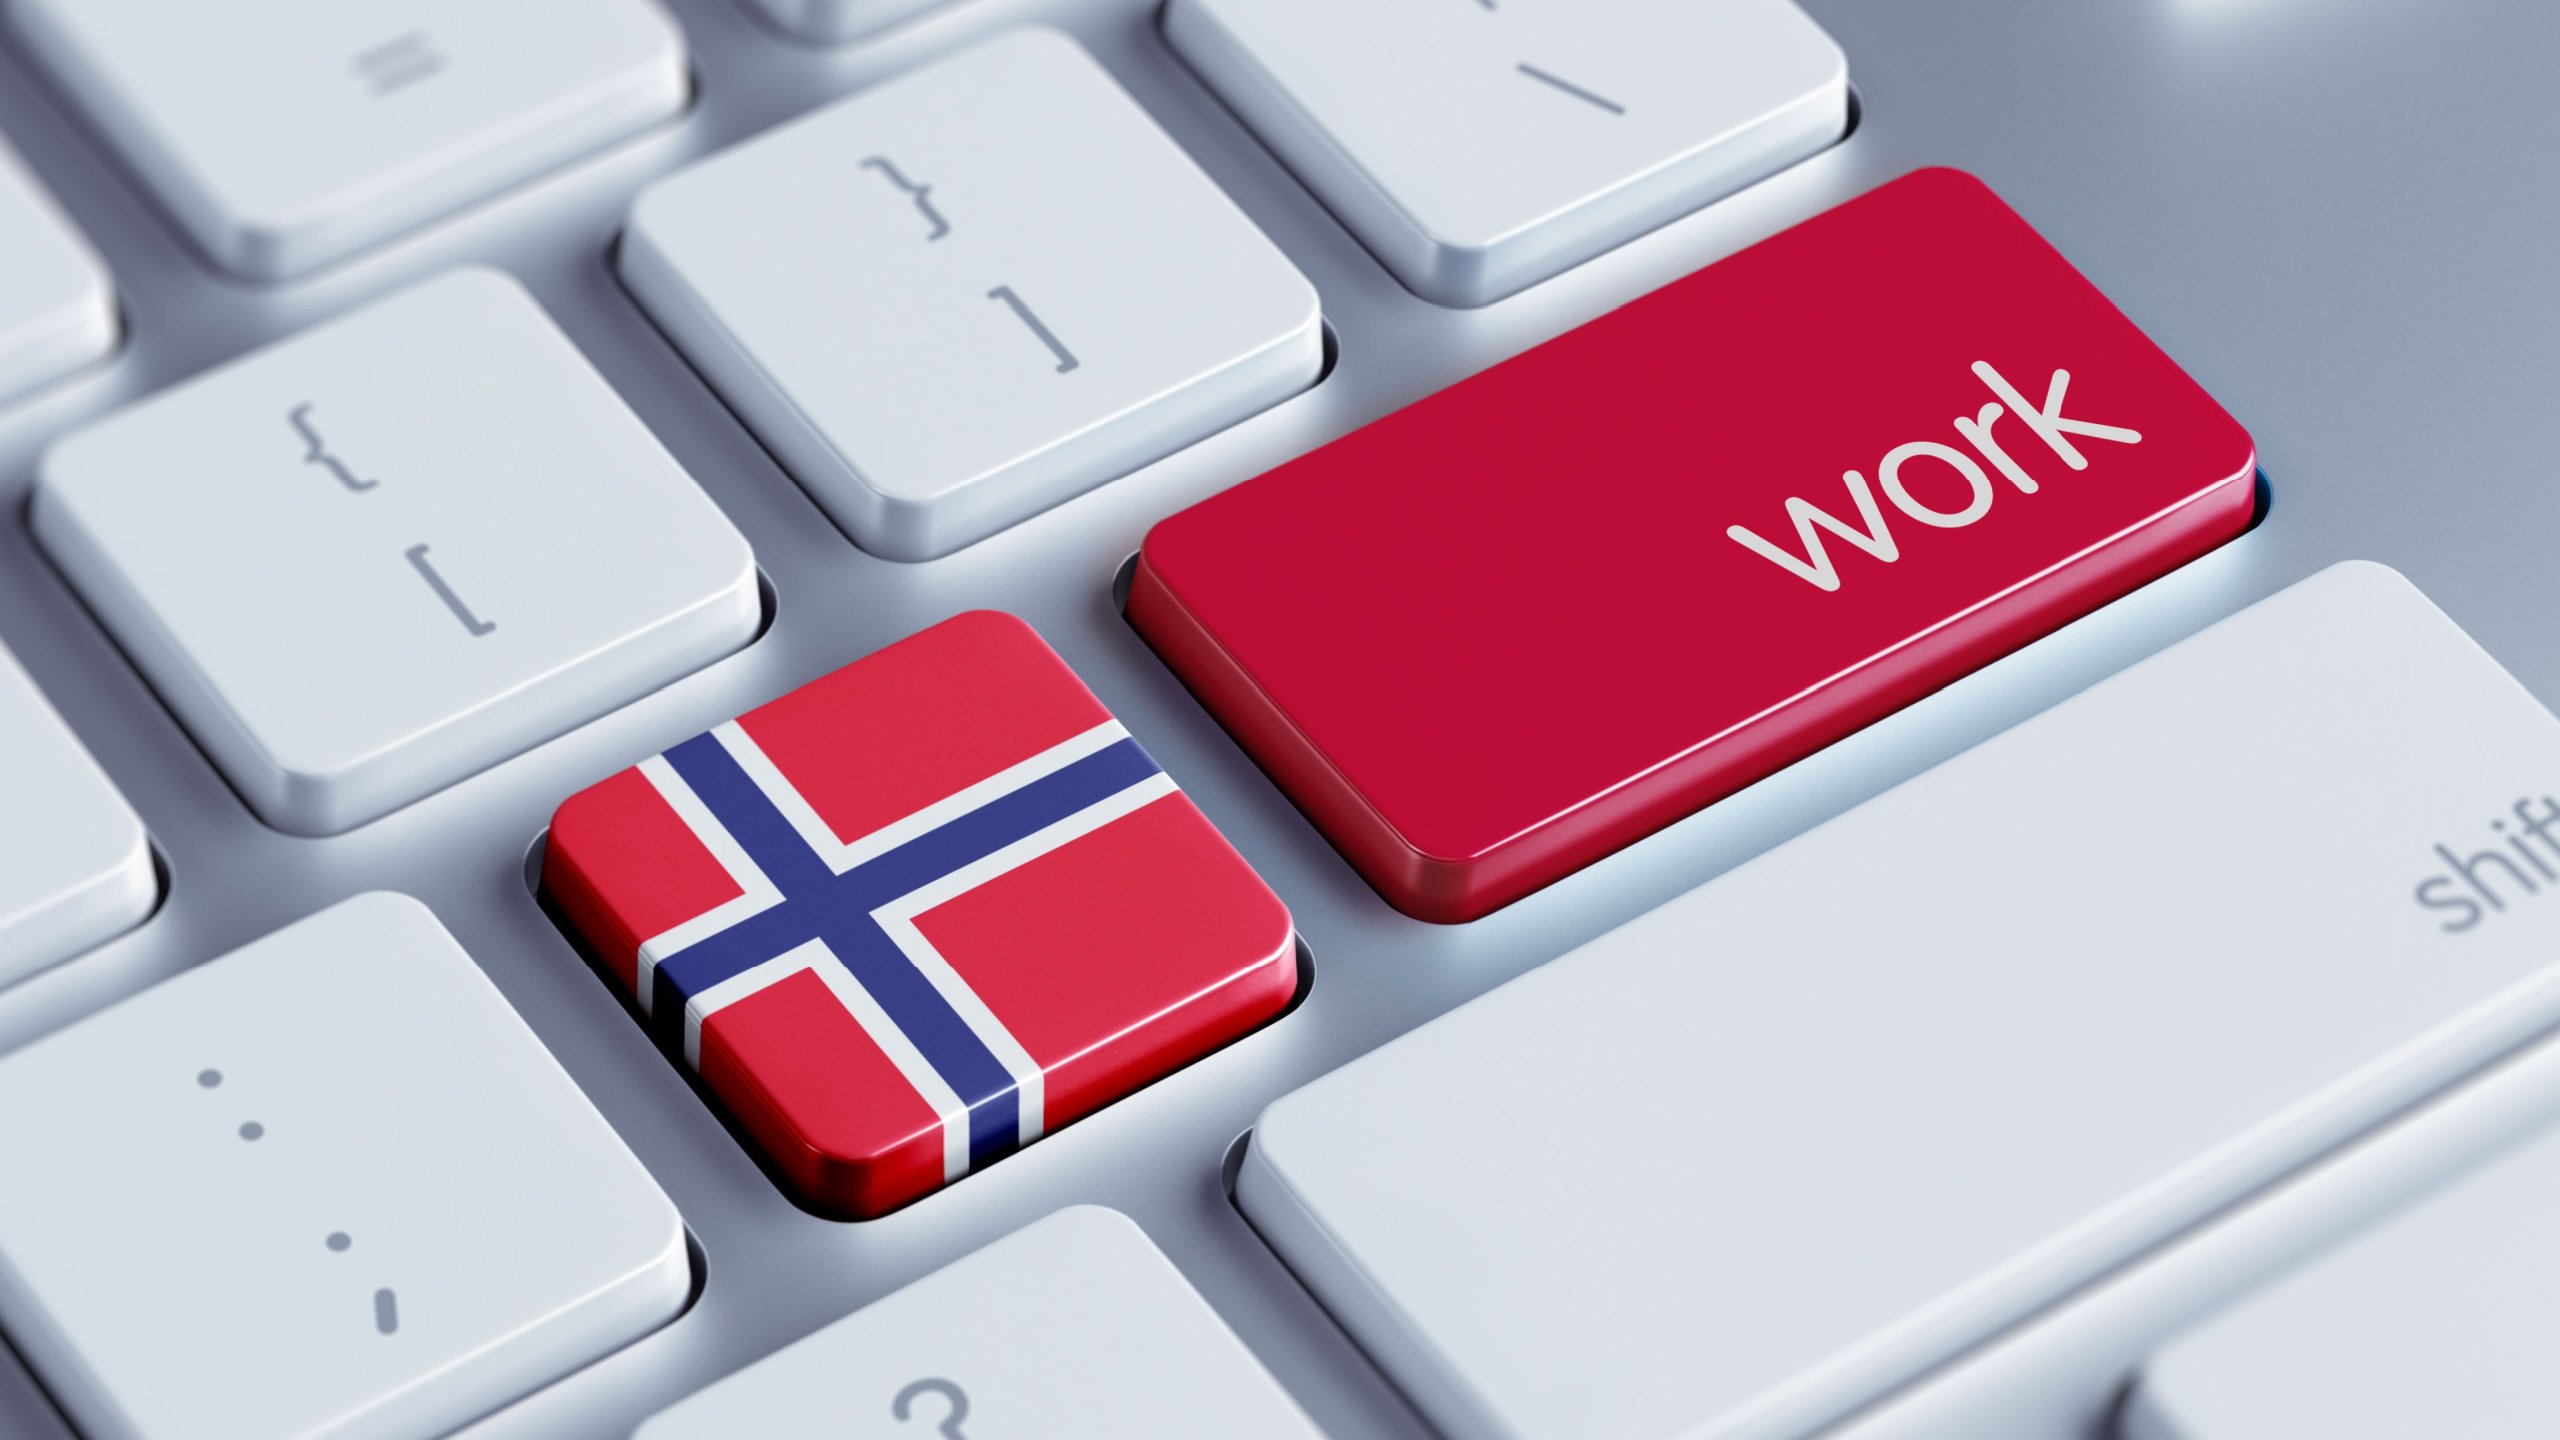 Work in Norway keyboard concept image.